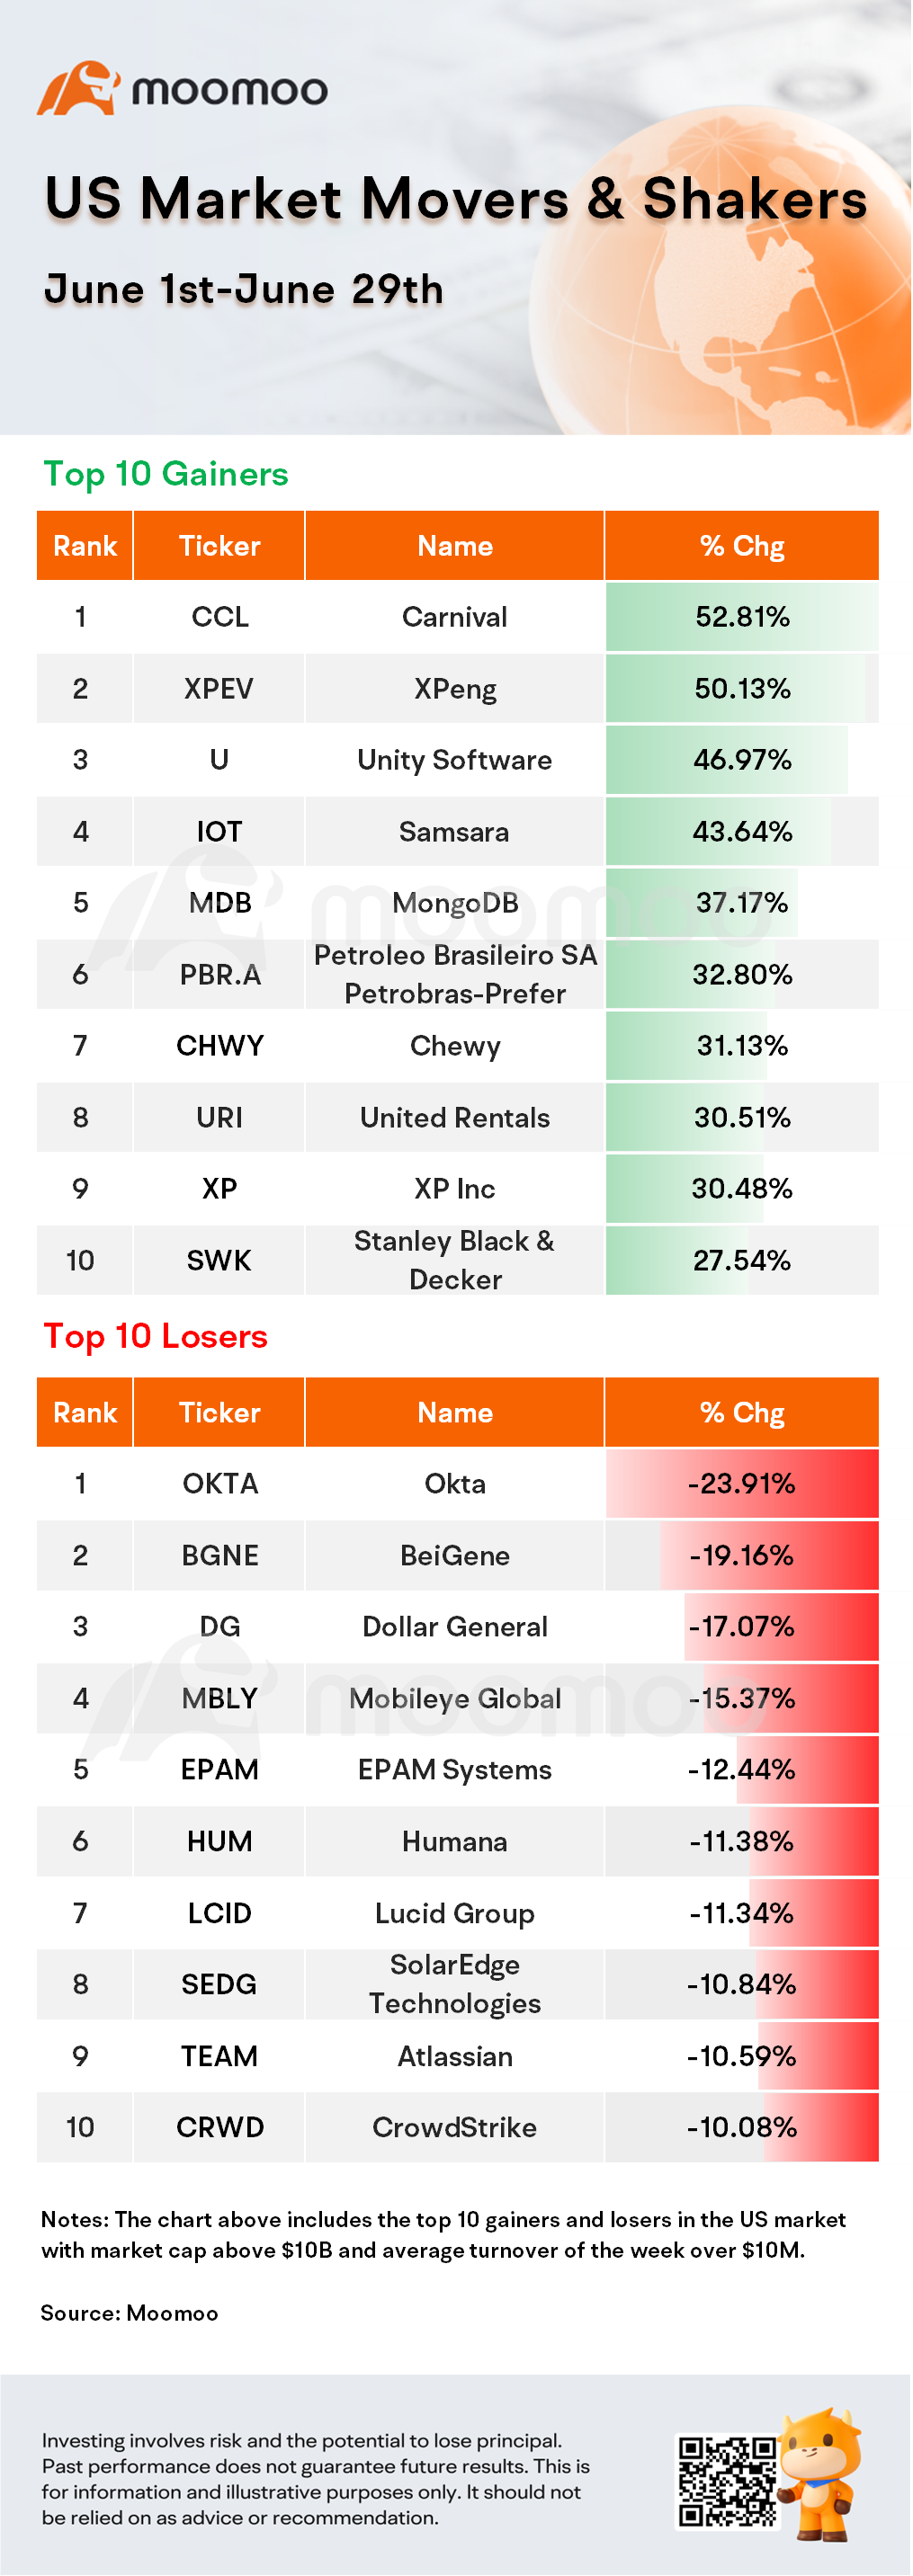 US Market Movers & Shakers (June 1st - June 29th)